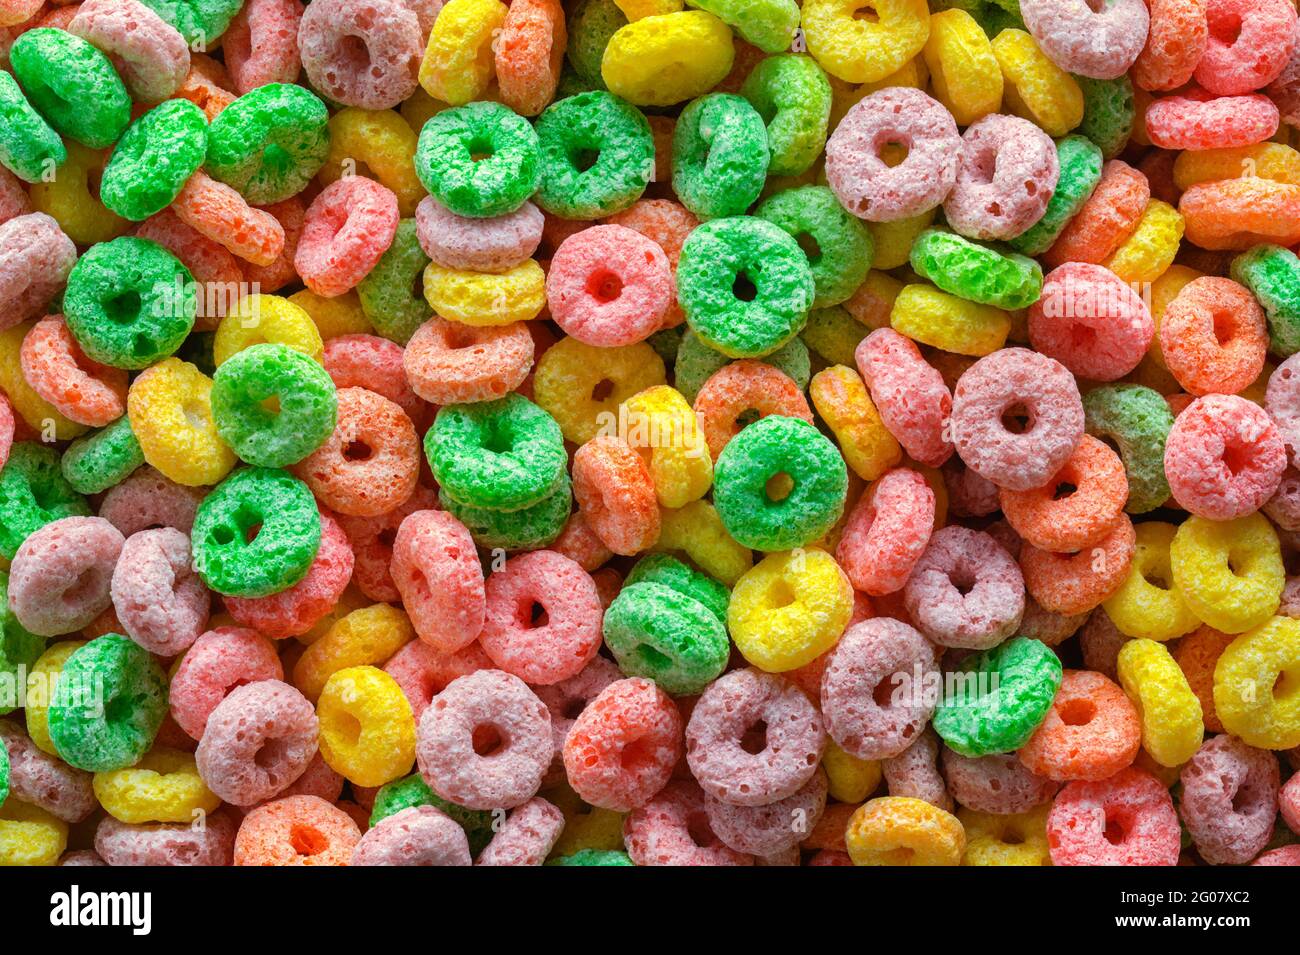 Pile of Fruit Cereal Background Texture Close Up. Stock Photo